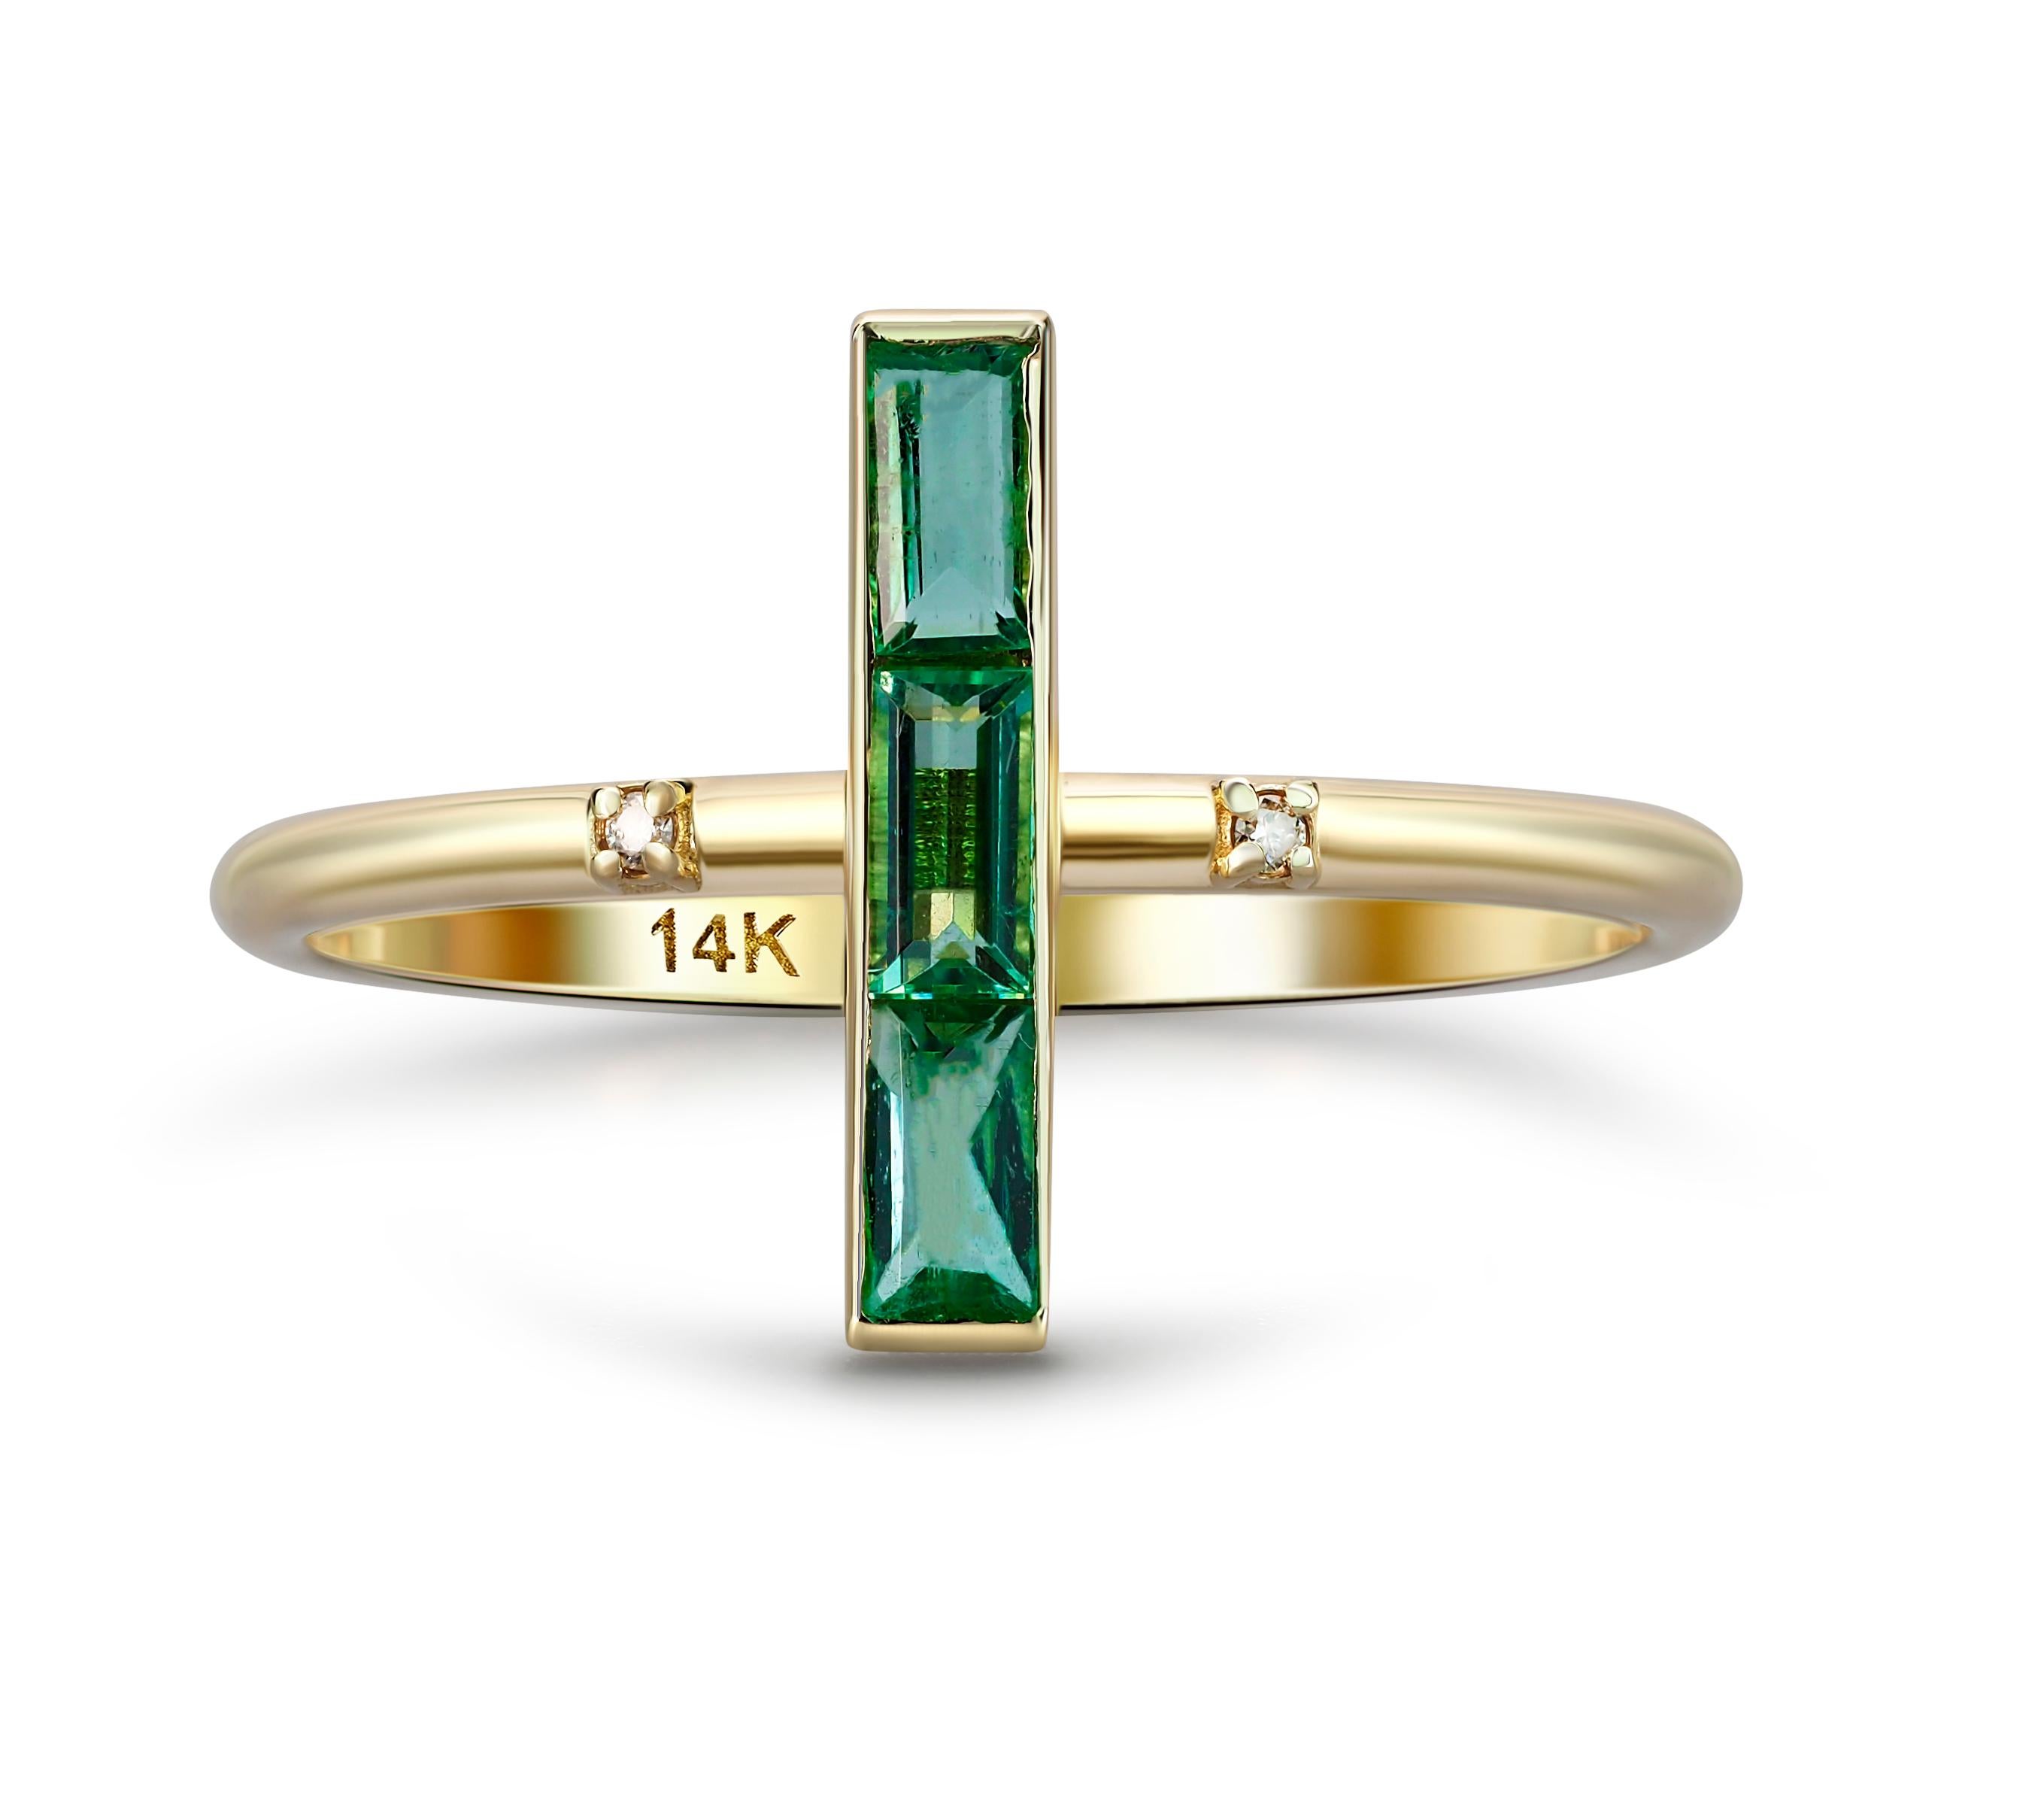 14k gold ring with natural Emeralds. 
Baguette emerald ring. Minimalist emerald ring. Unisex ring. May Birthstone Ring. Emerald gold ring.

Metal: 14k gold
Weight: 1.55 g. depends from size.

Central stone: Emeralds - 3 pieces
Cut: Baguette
Weight: